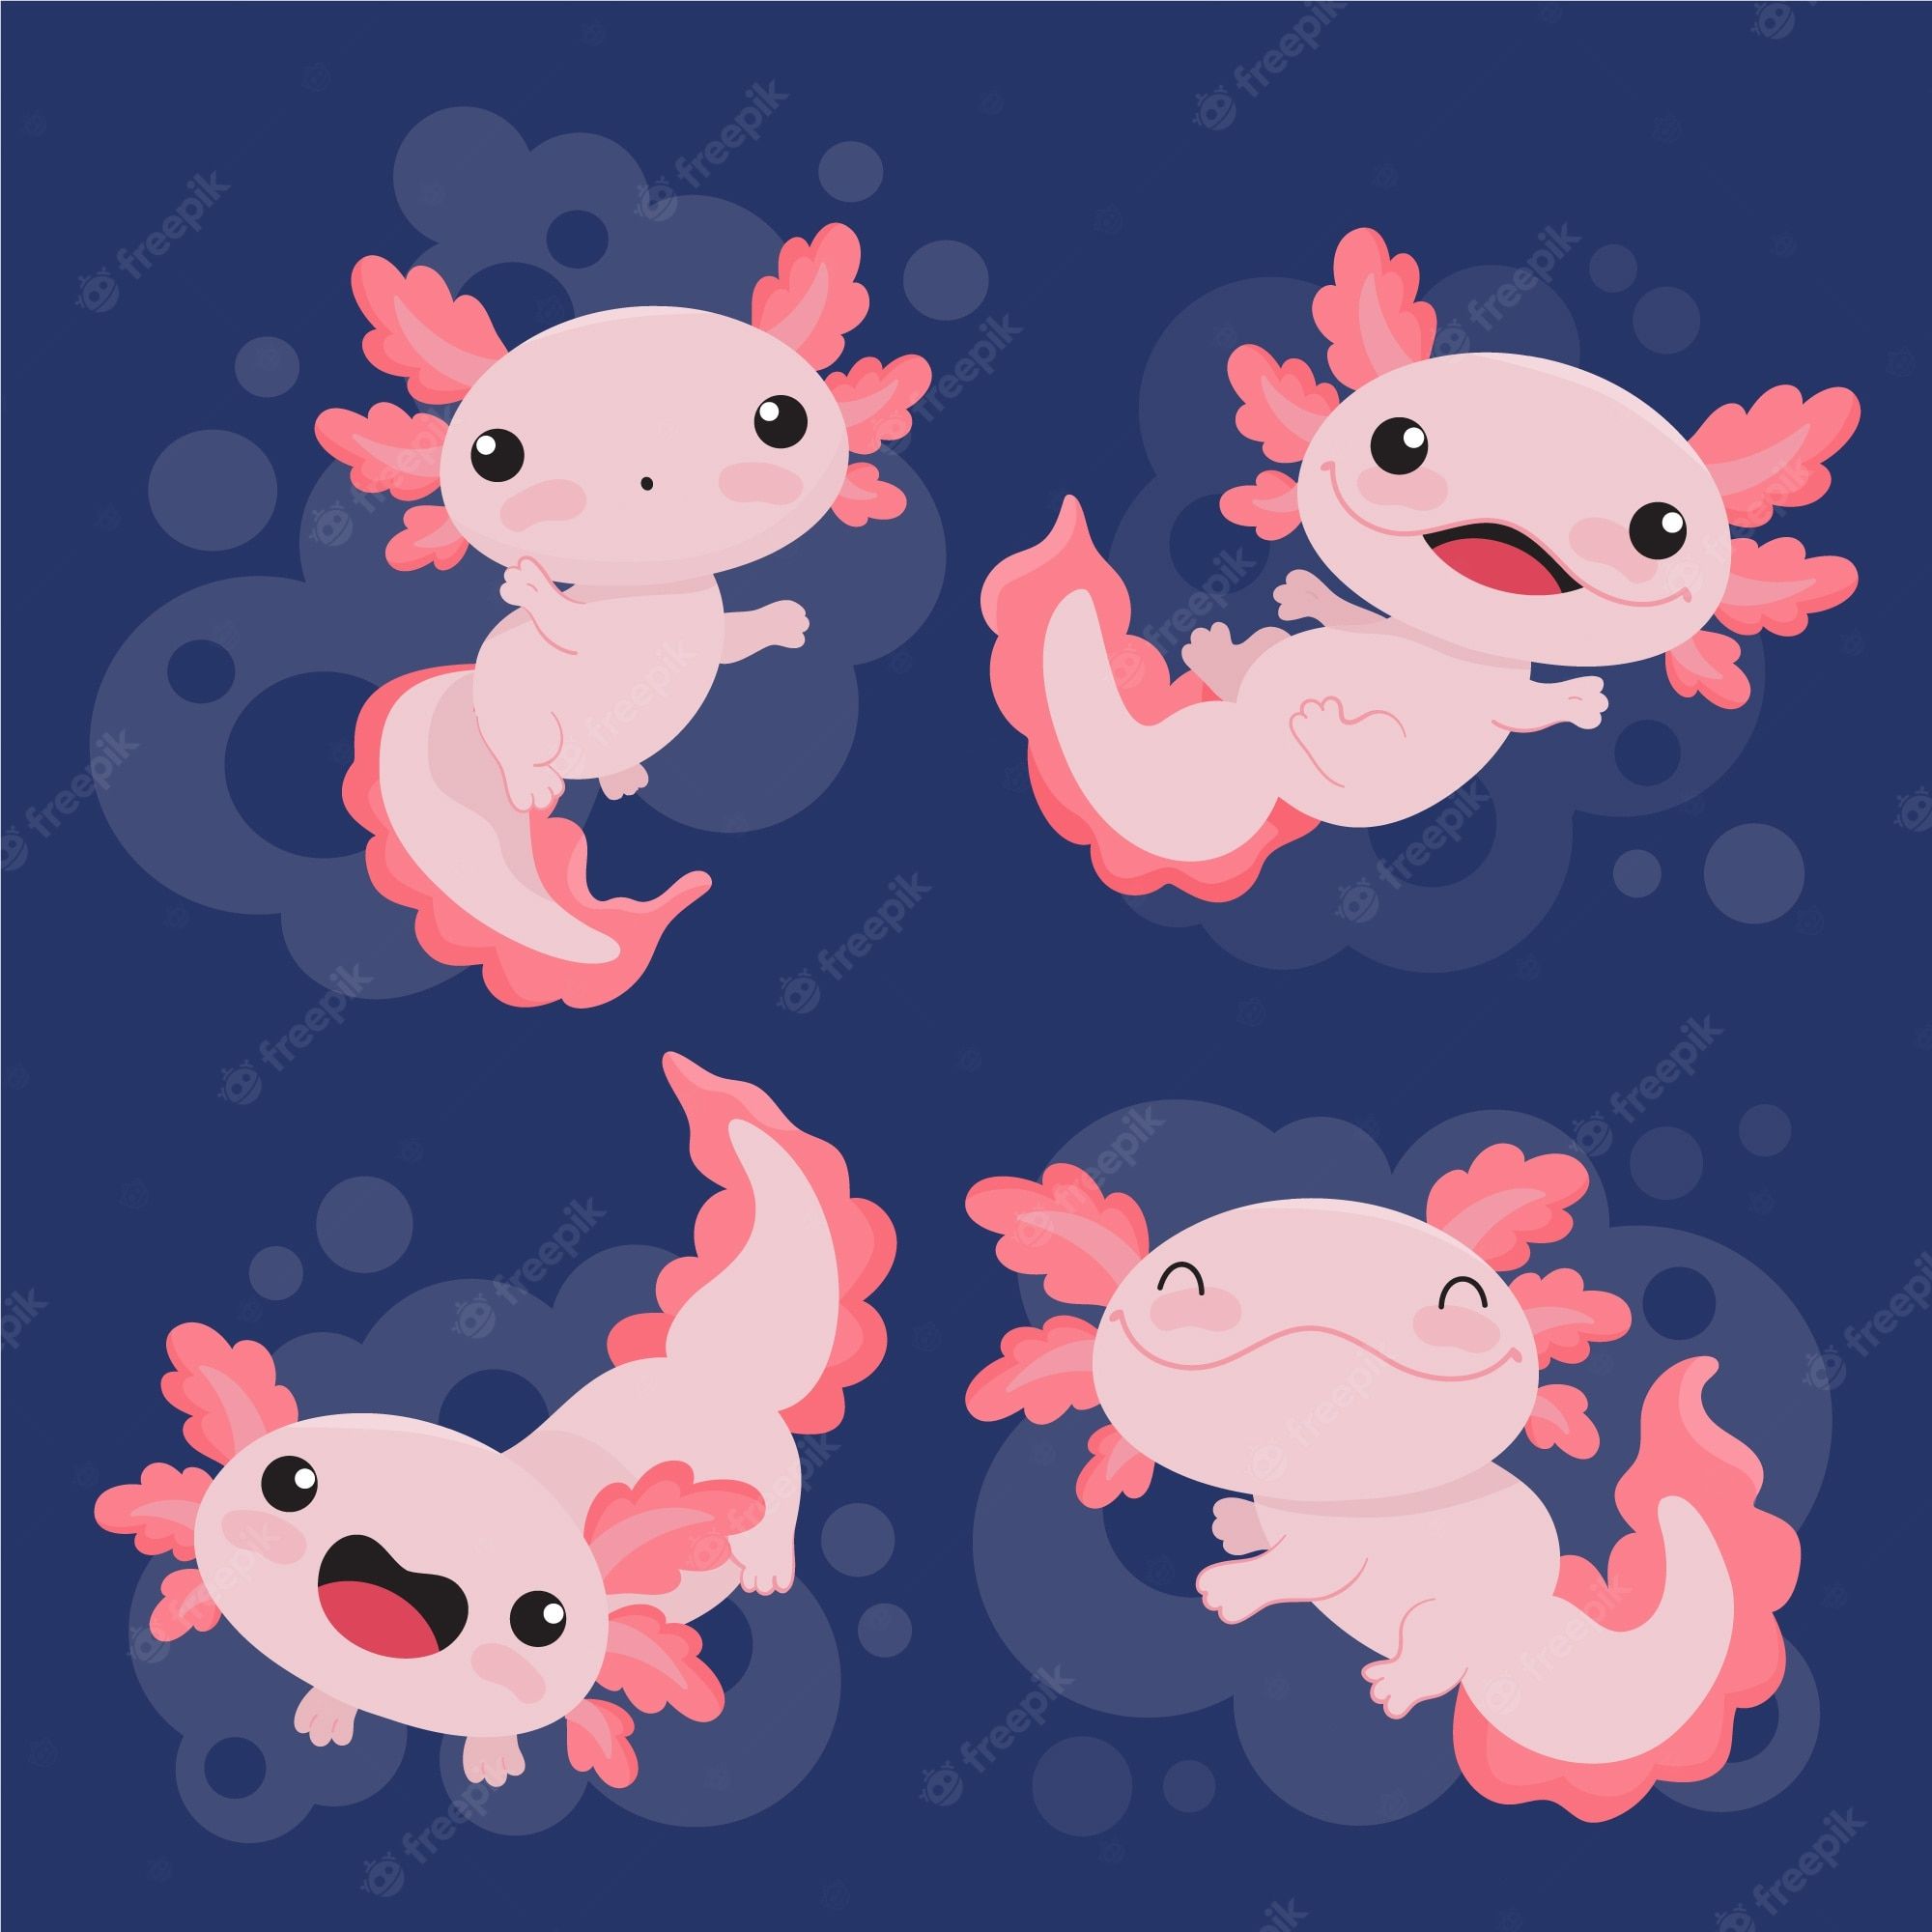 A set of axolotl characters in different poses - Axolotl